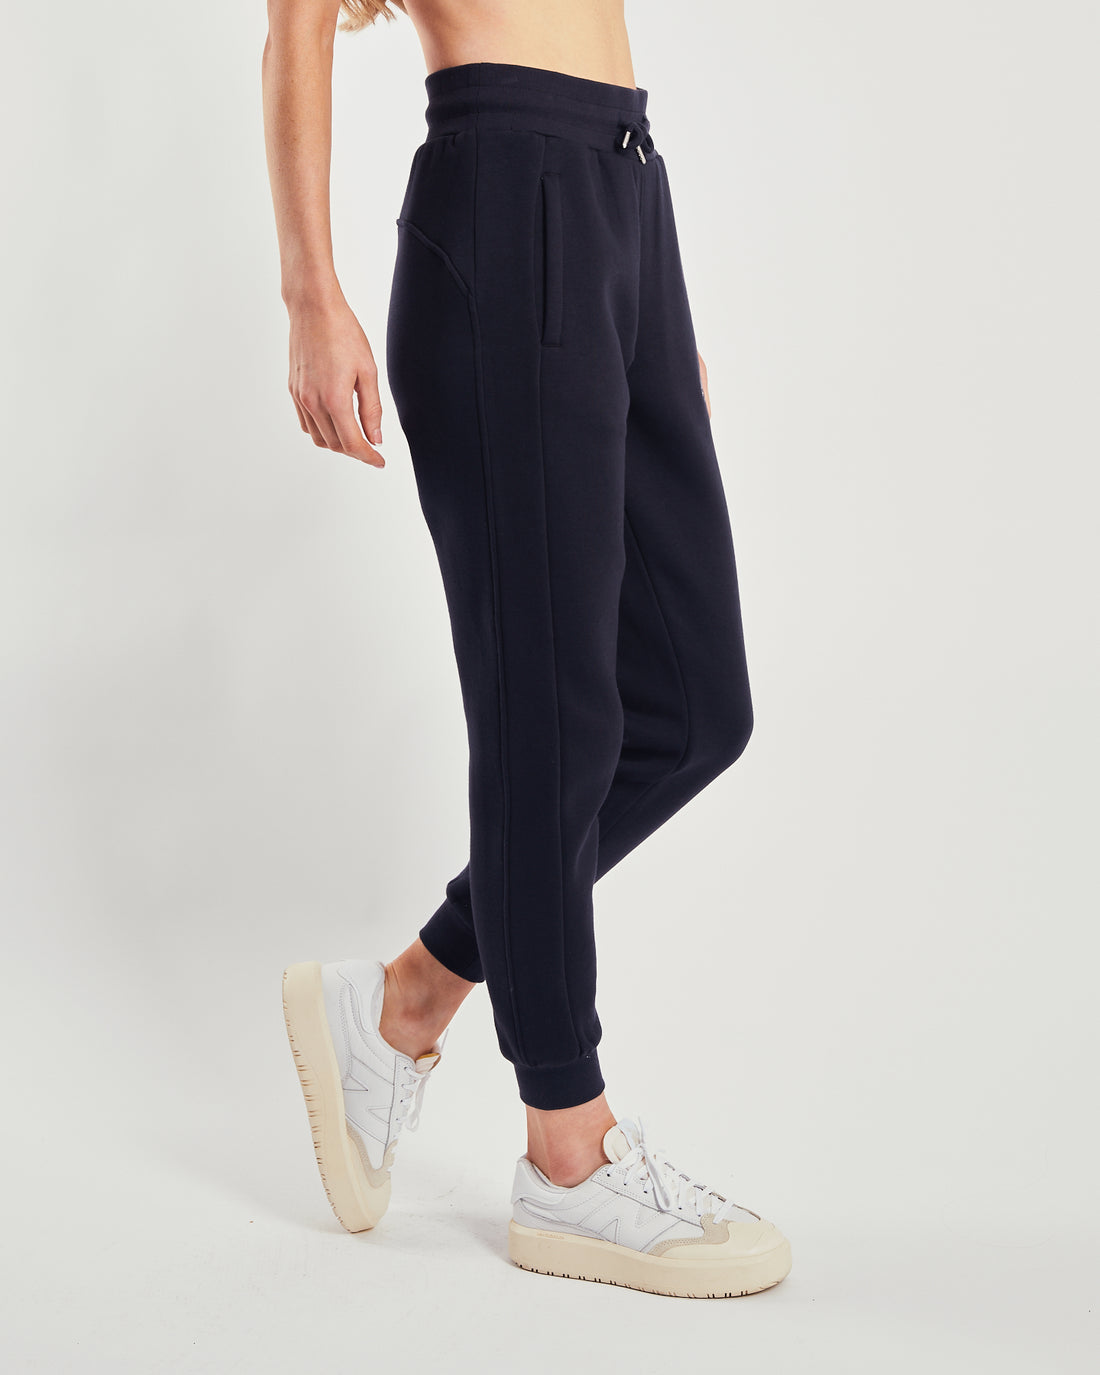 Nat Navy Women's Joggers-Side view